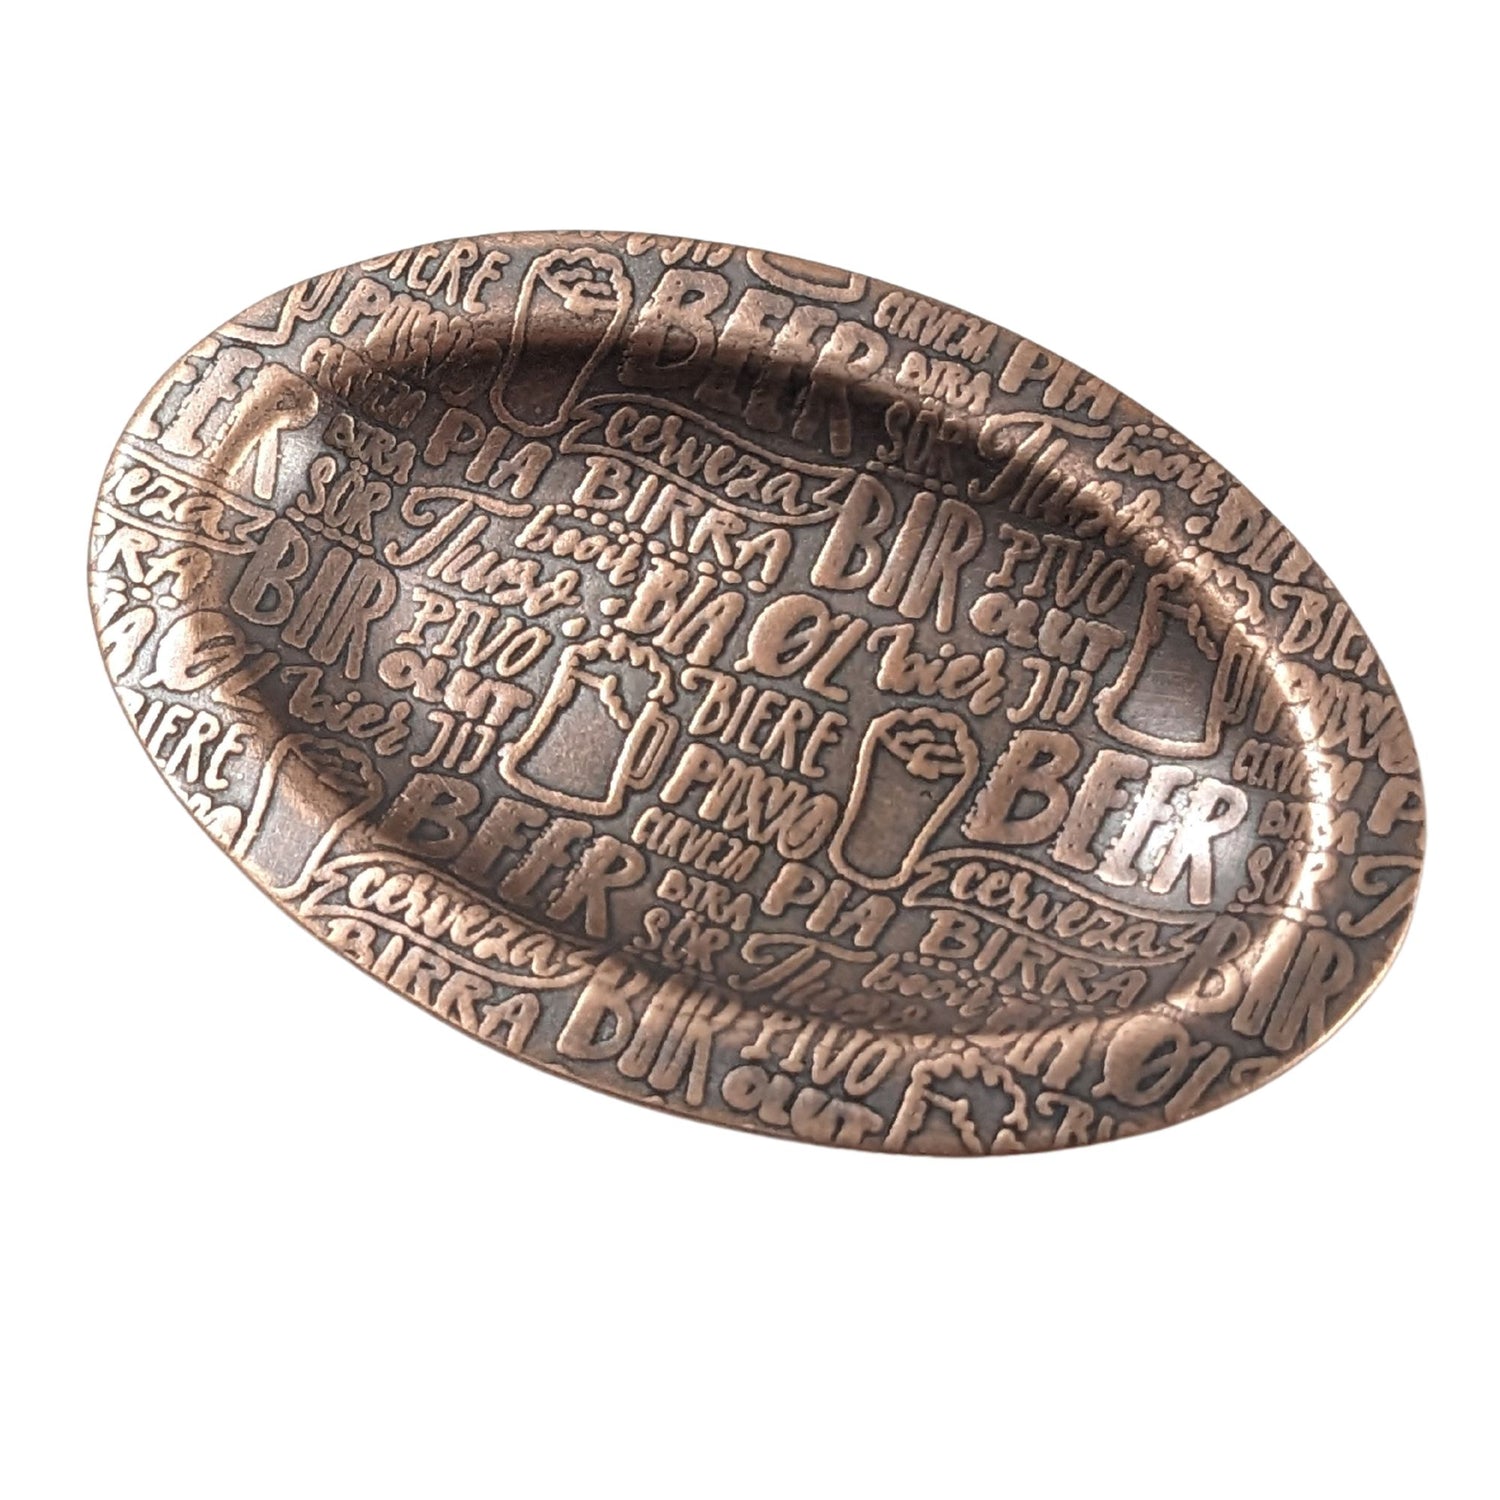 An oval copper ring dish with a raised edge. The dish has an impressed pattern made up of the word beer in many languages.